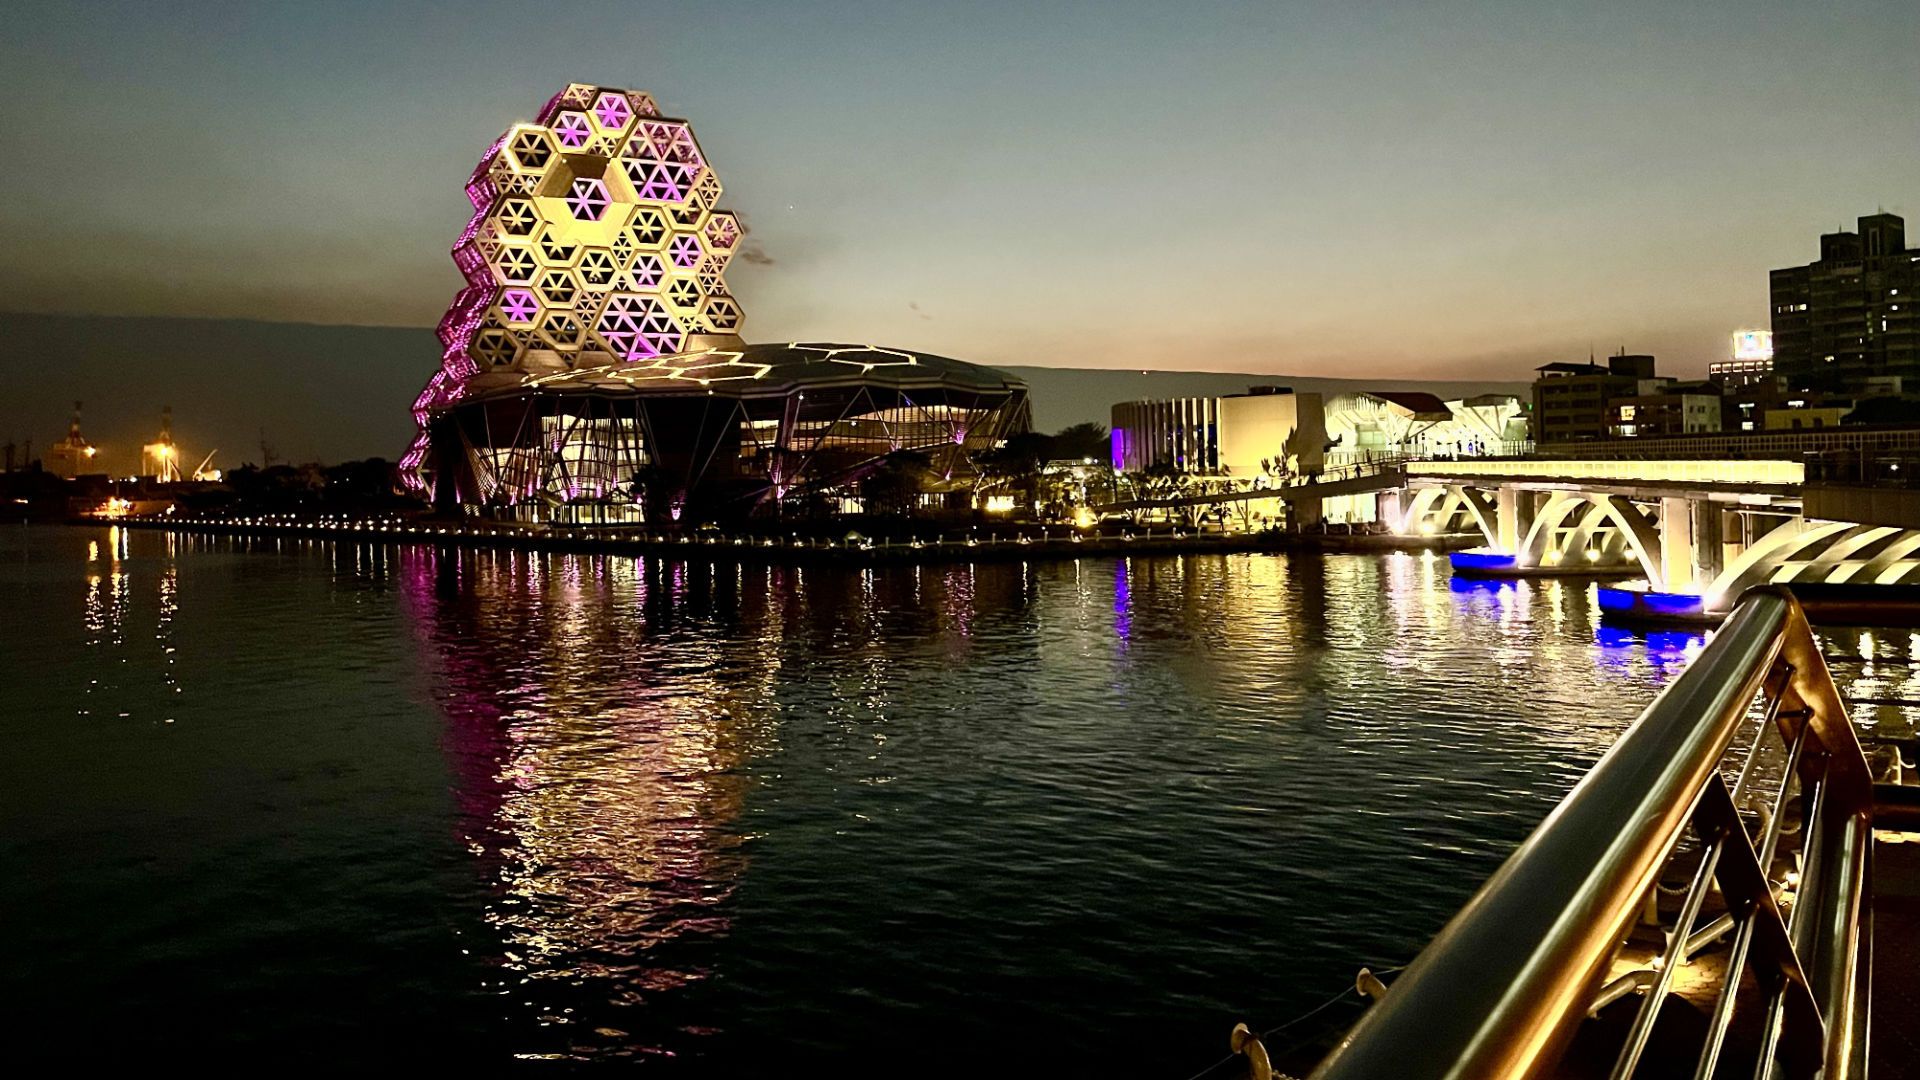 Evening photo of Kaohsiung Music Center from across the mouth of Love River.